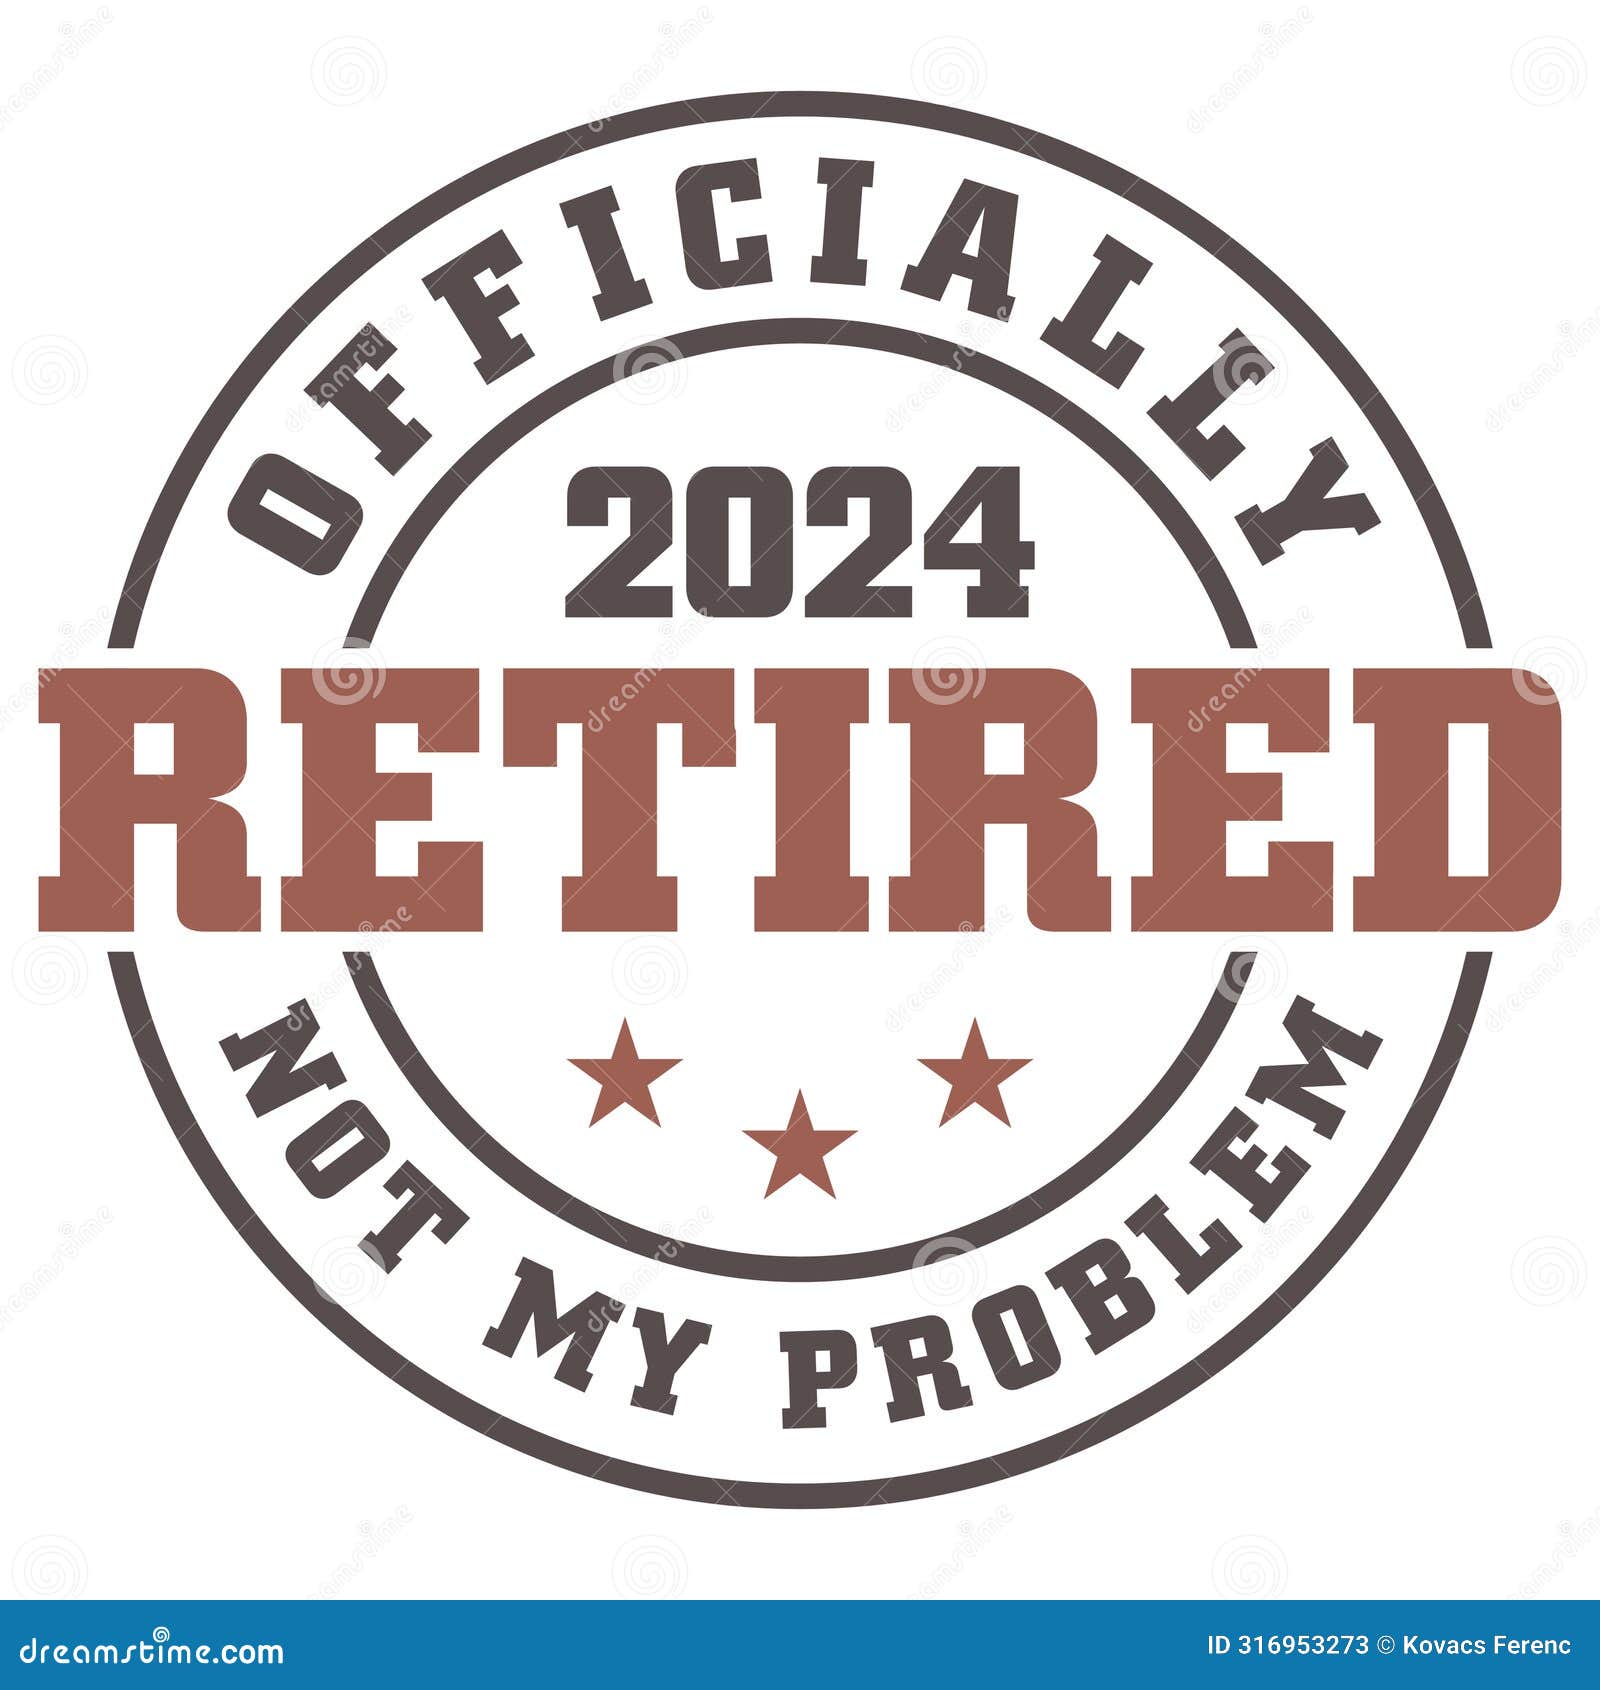 officially retired 2024, retirement  and clip art